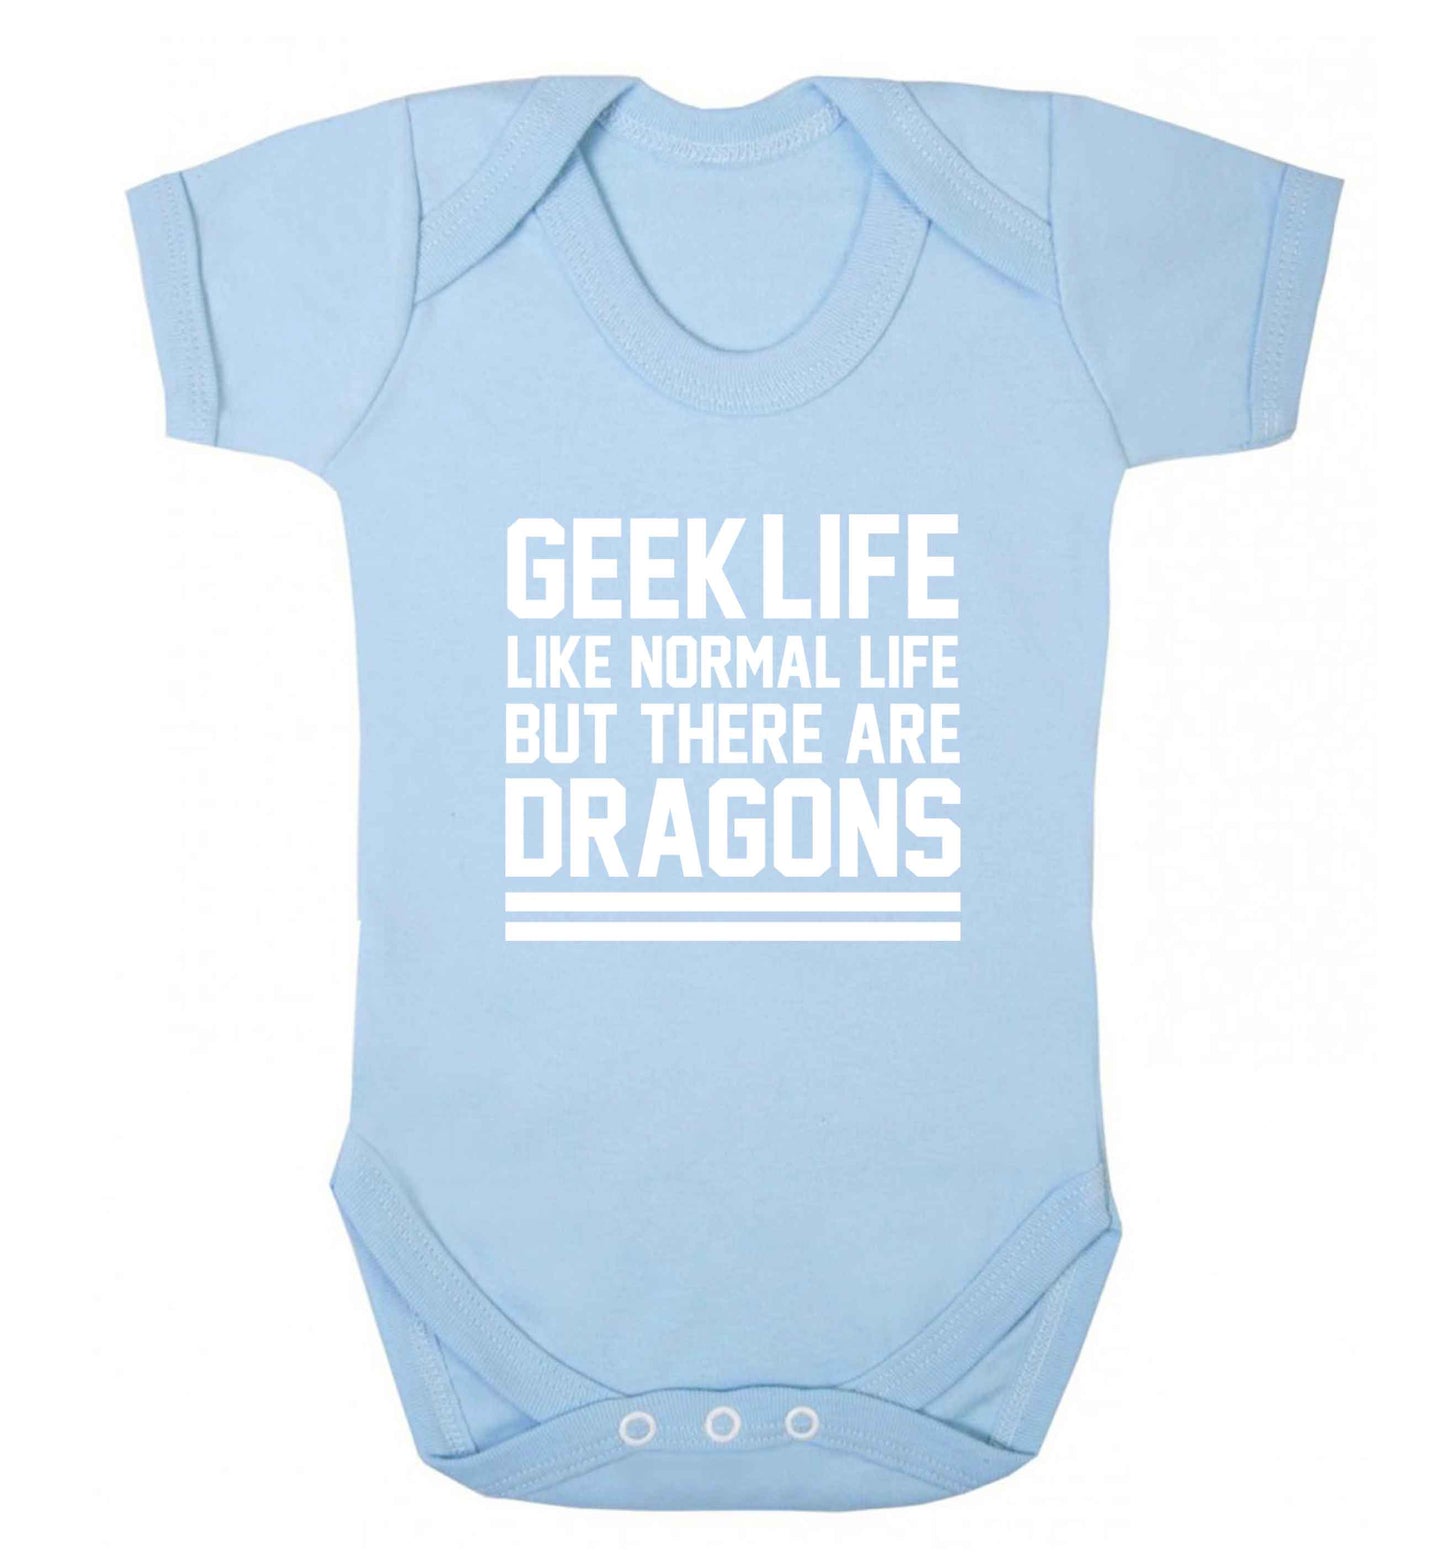 Geek life like normal life but there are dragons baby vest pale blue 18-24 months